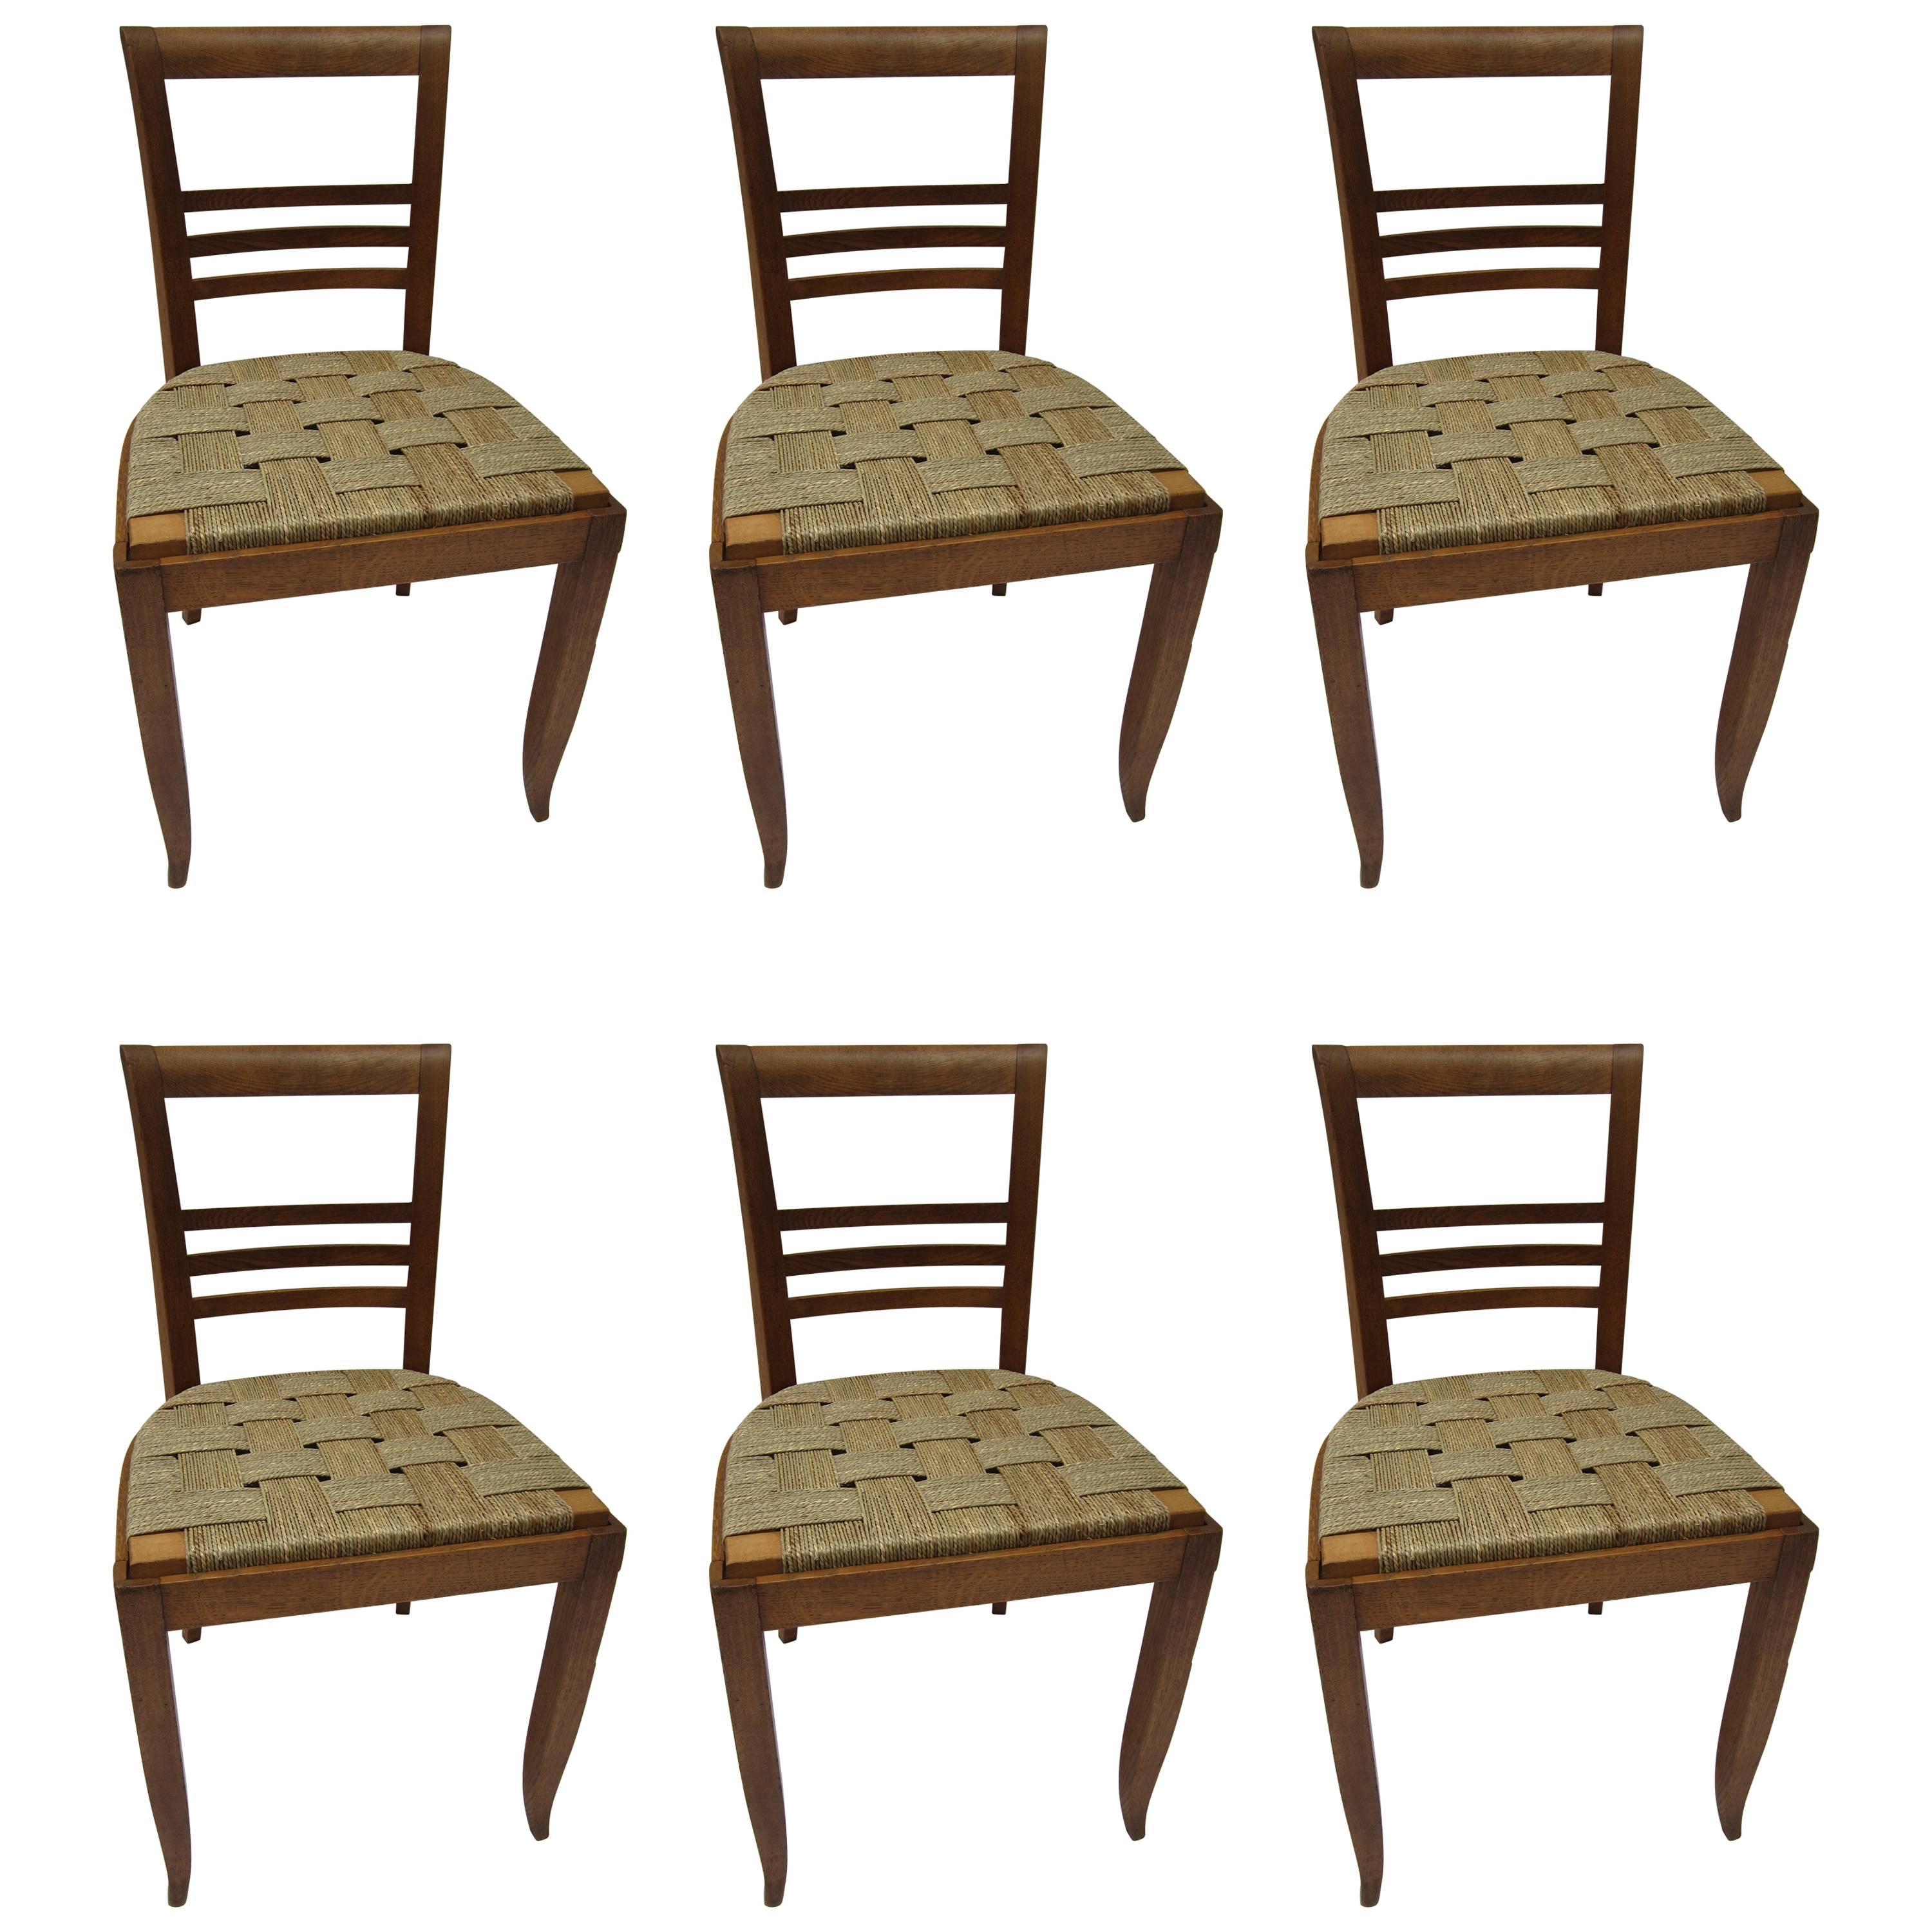 Set of Six French Oak Chairs with Seagrass Seats